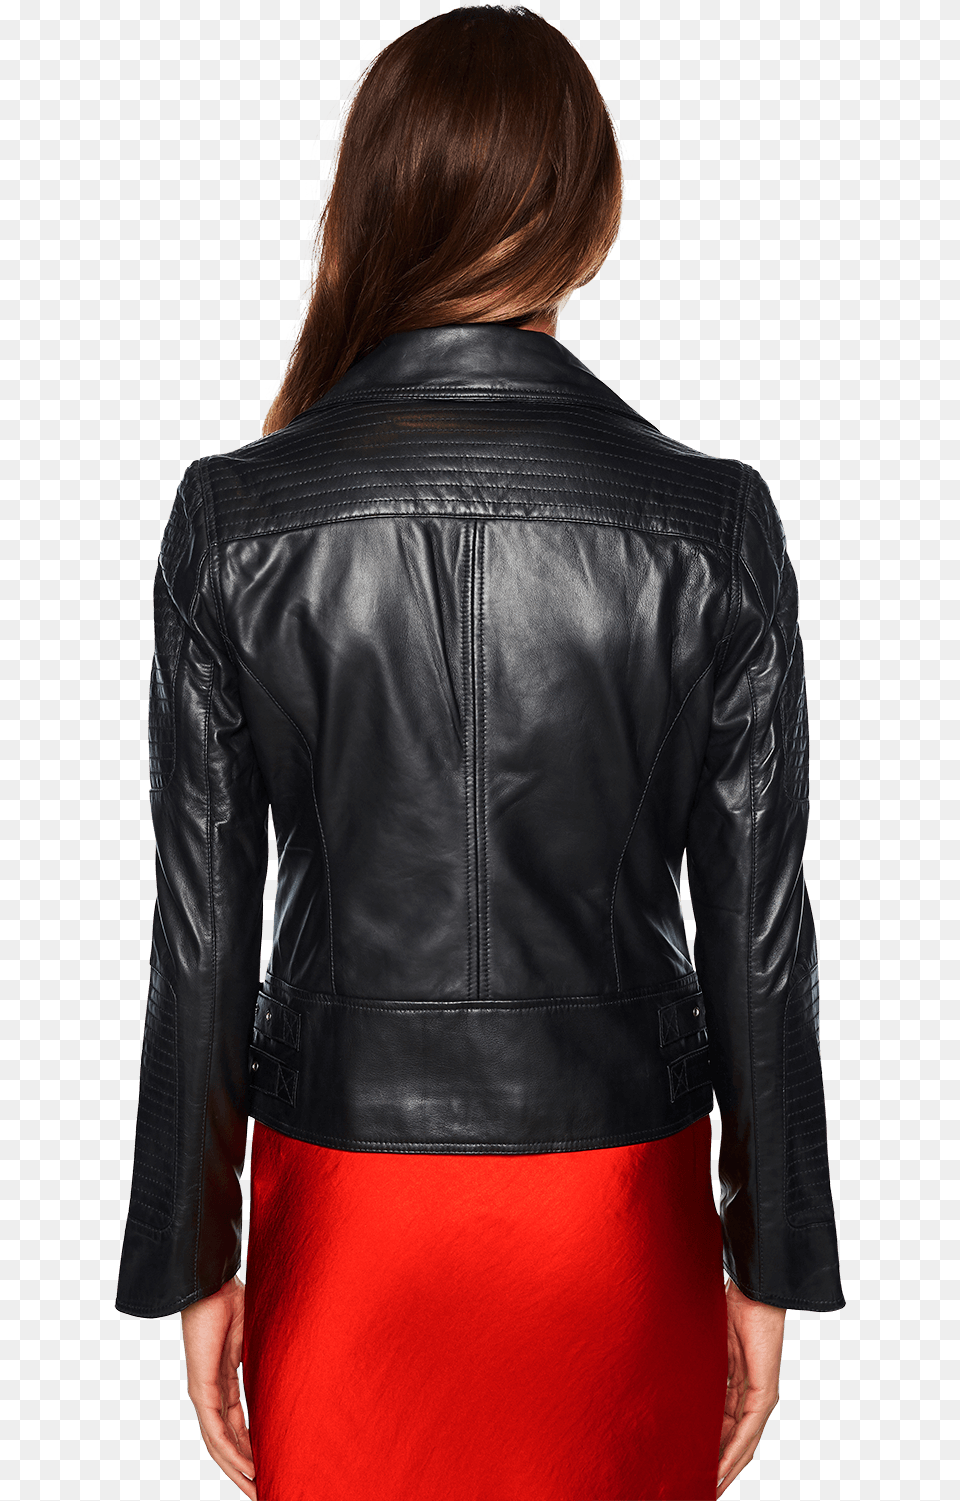 Liana Leather Biker Jacket In Colour Caviar Leather Jacket, Clothing, Coat, Adult, Female Png